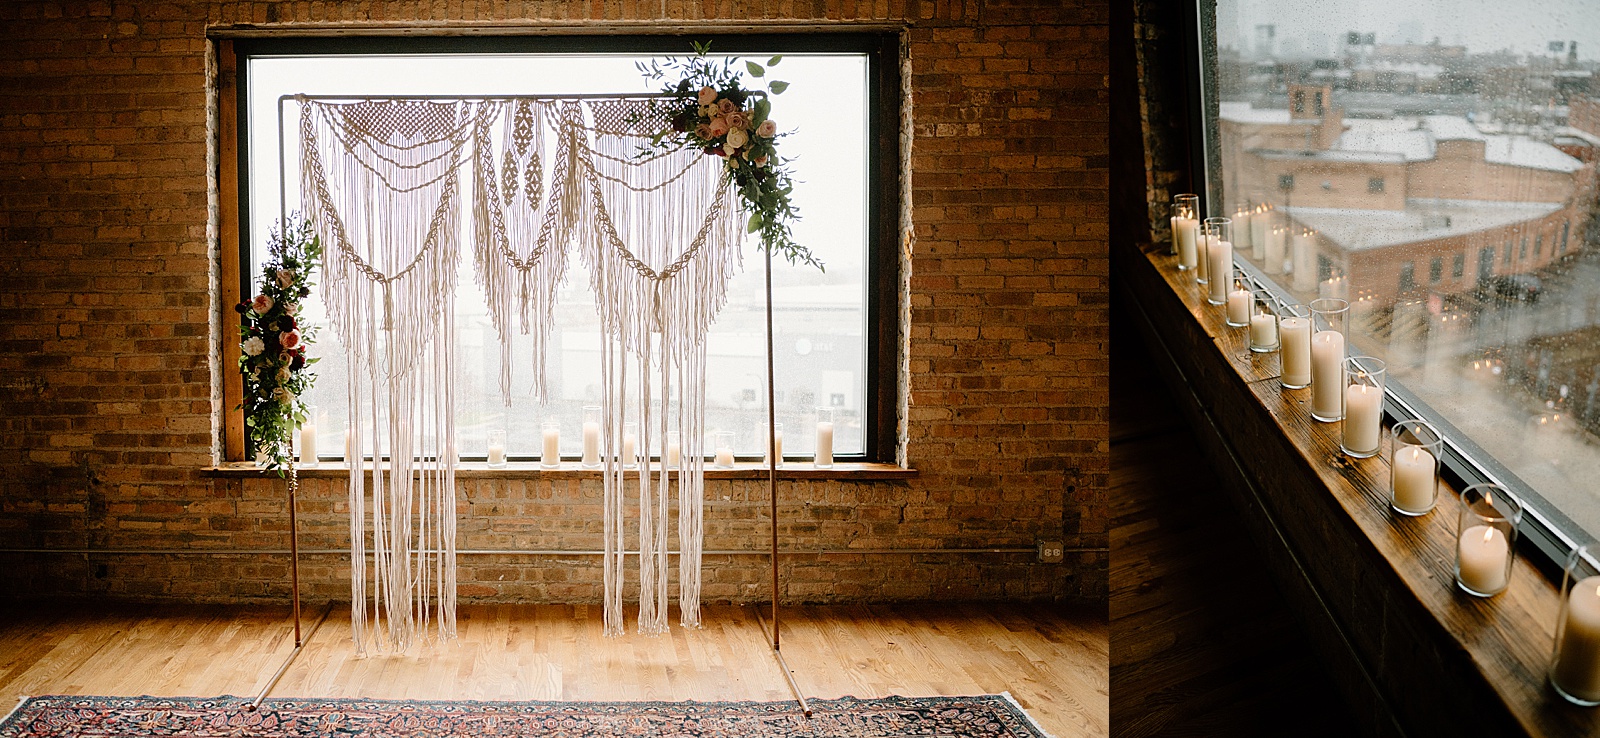 Ceremony details for boho day by Midwest wedding photographer Indigo Lace